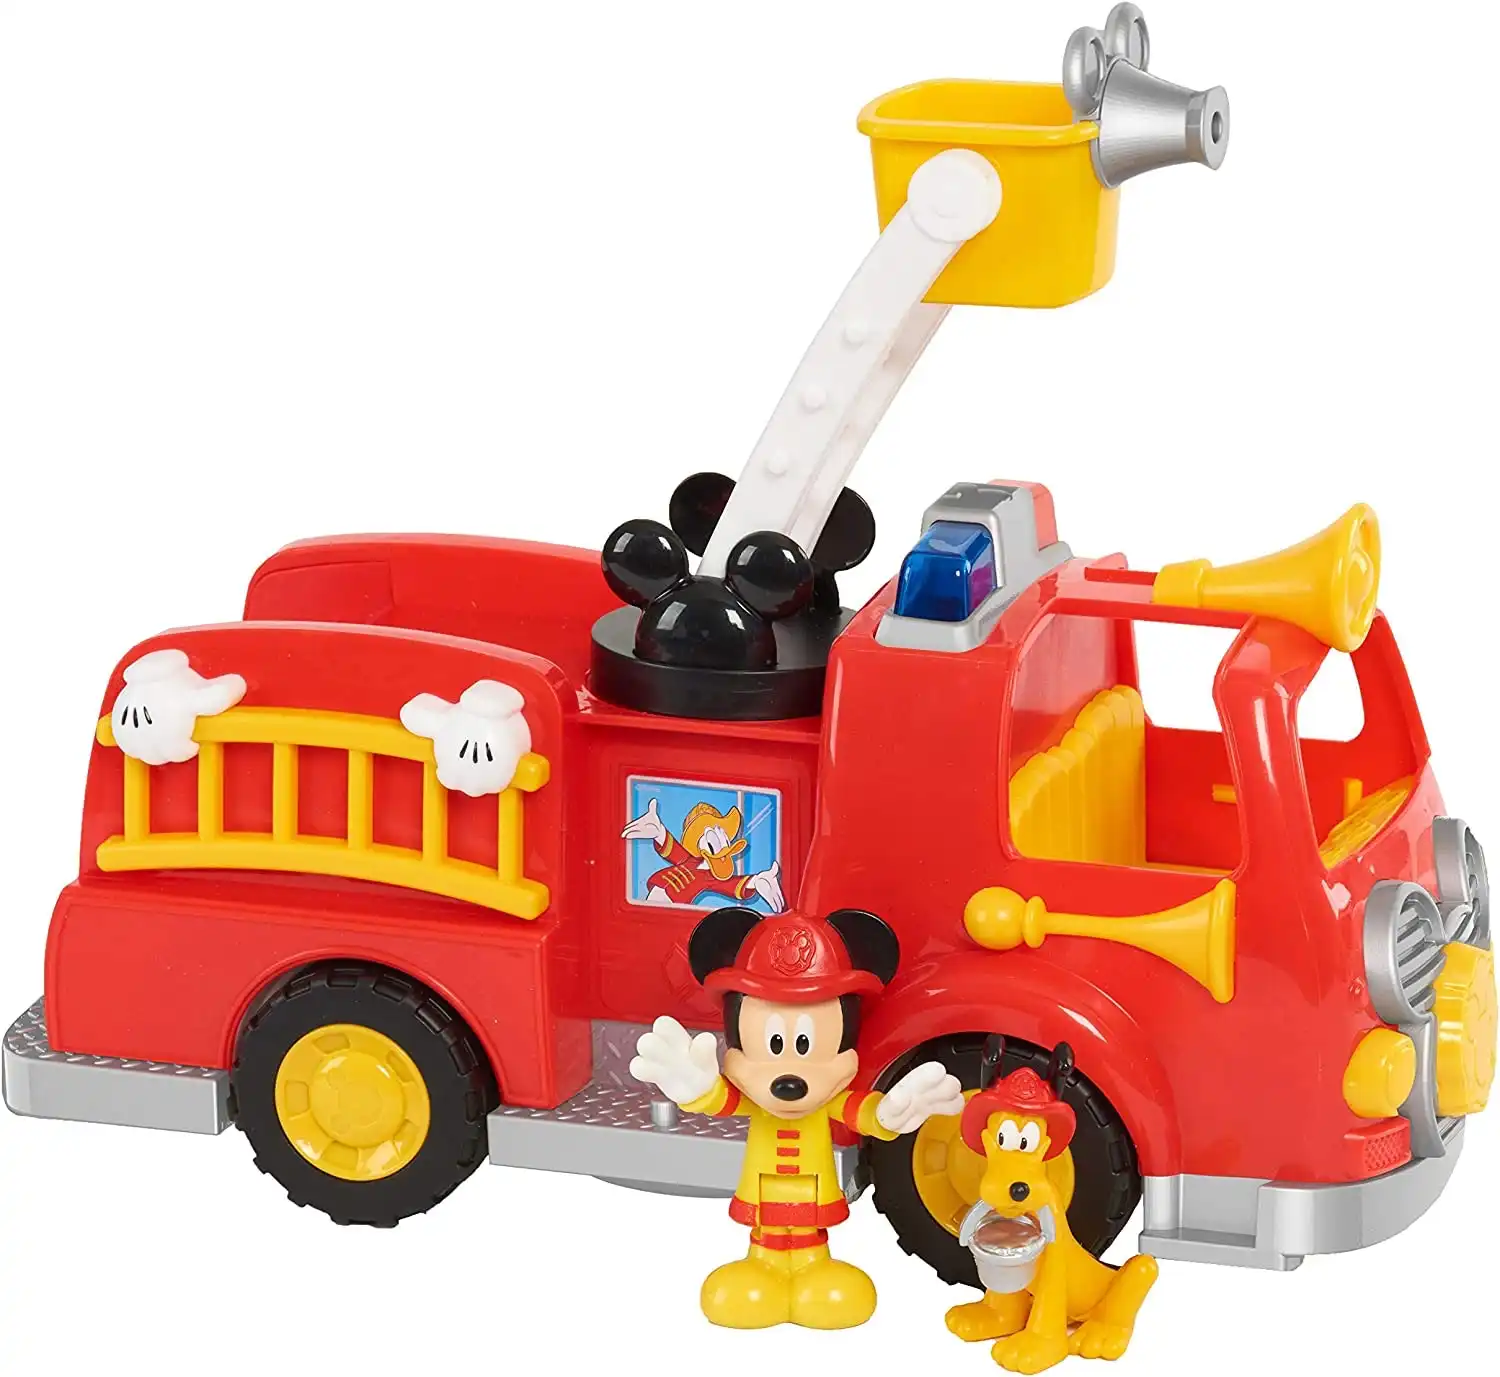 Disney's Mickey Mouse Mickey's Fire Engine